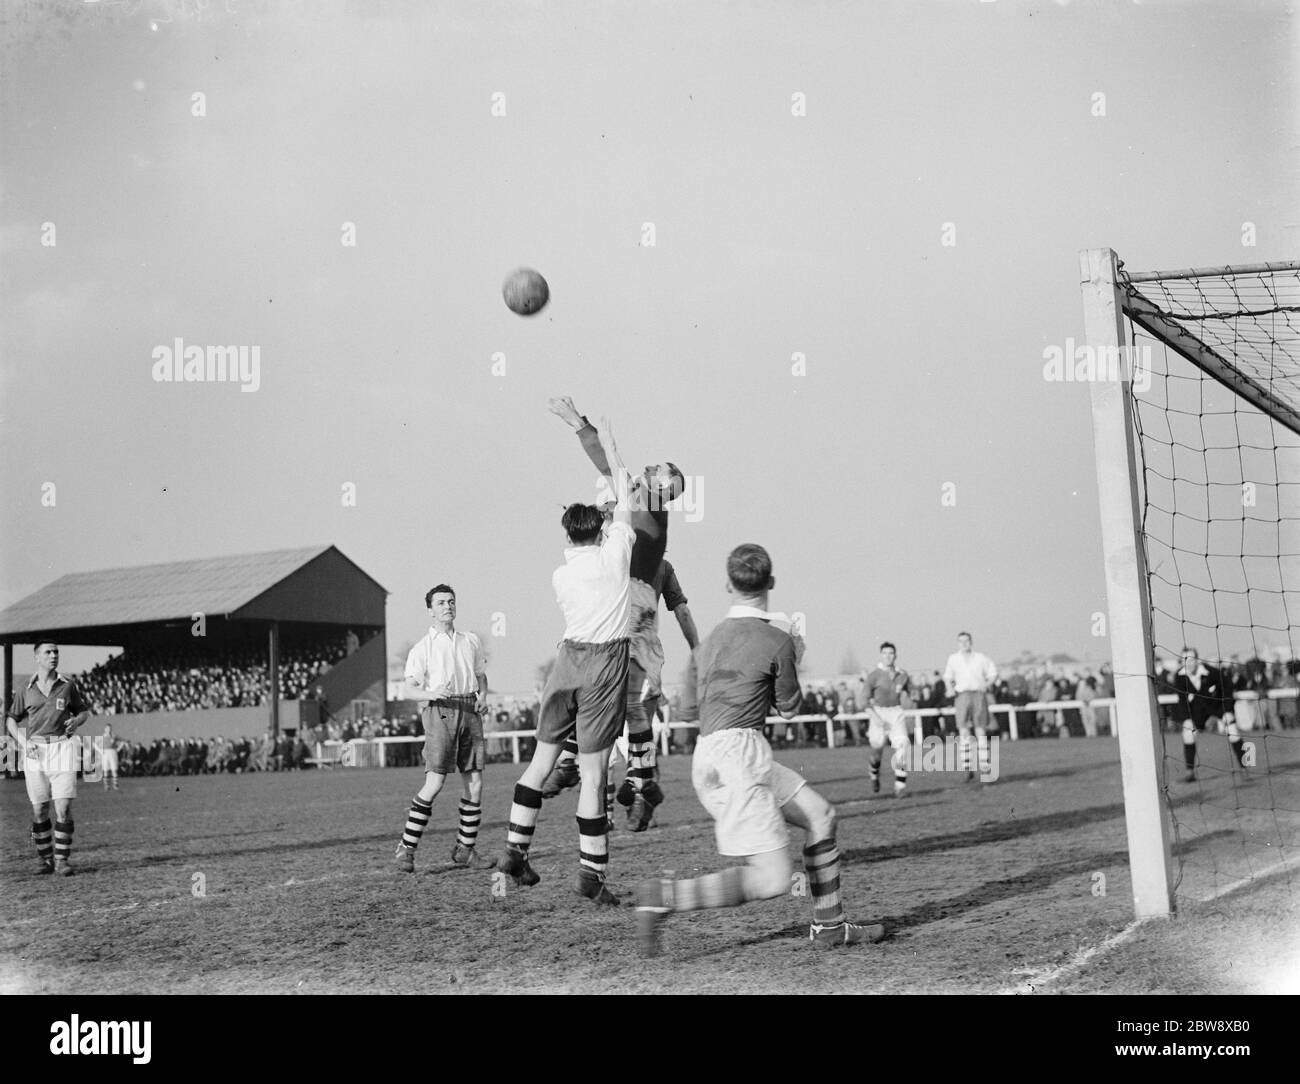 London Paper Mills vs. Leyton - FA Amateur Cup - Gordon Bennett punches clear of a Leyton forward - 27/02/37 Players compete for the ball in the air . 1937 Stock Photo